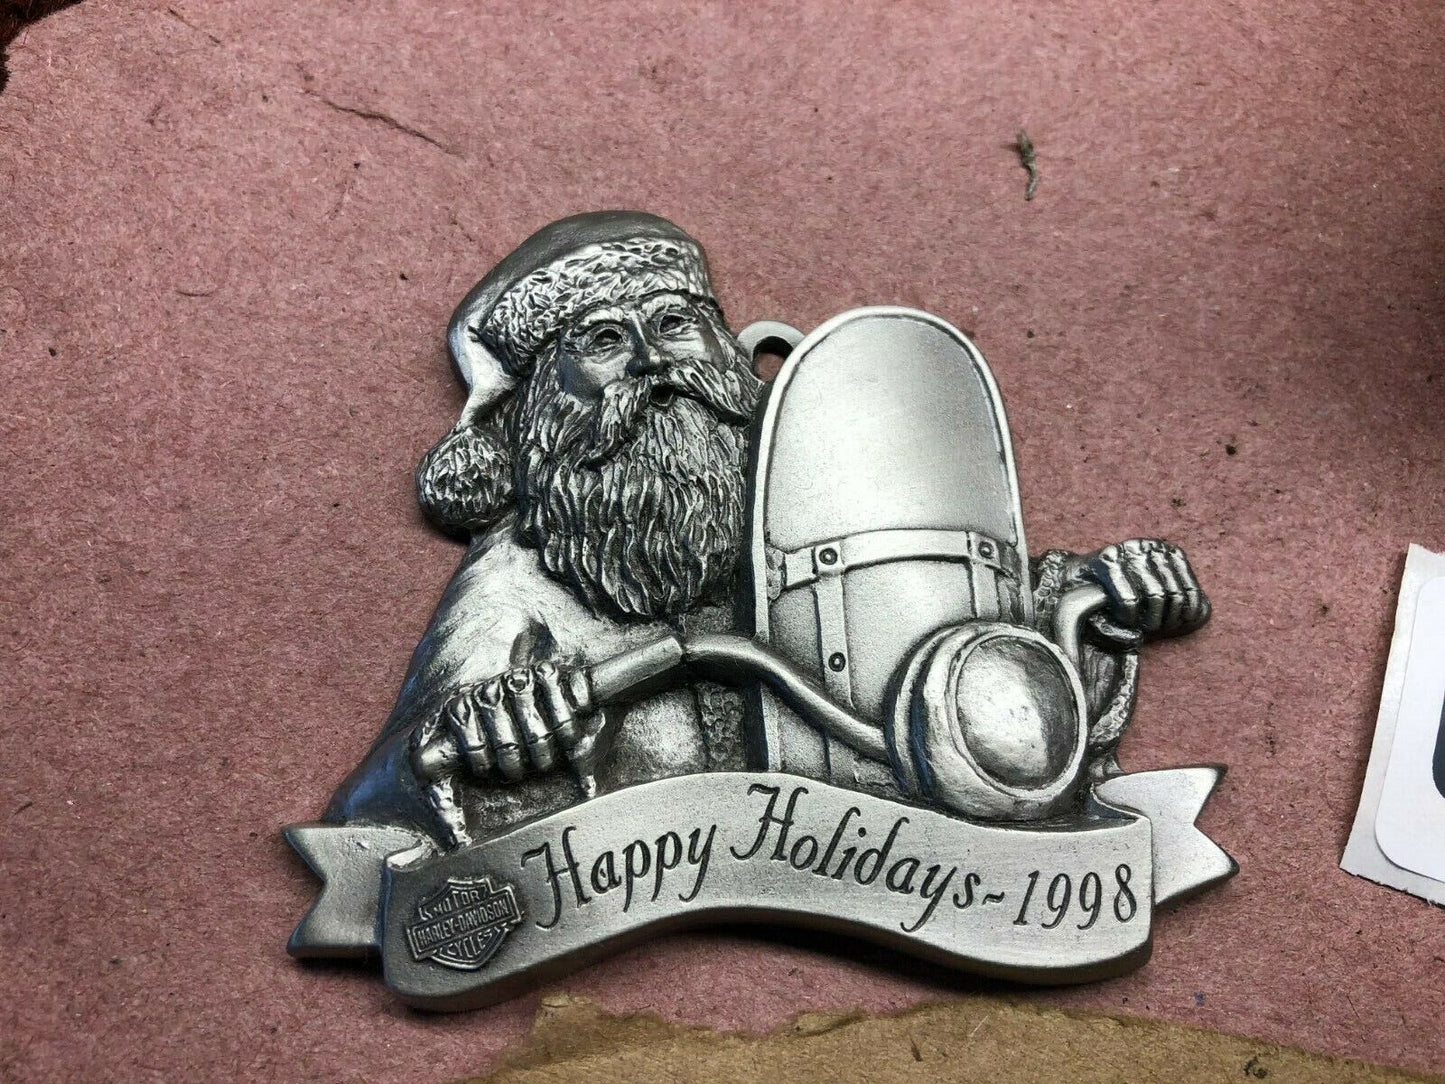 Harley Davidson 1998 Pewter Holiday Ornament Jolly Rider Christmas New in Box